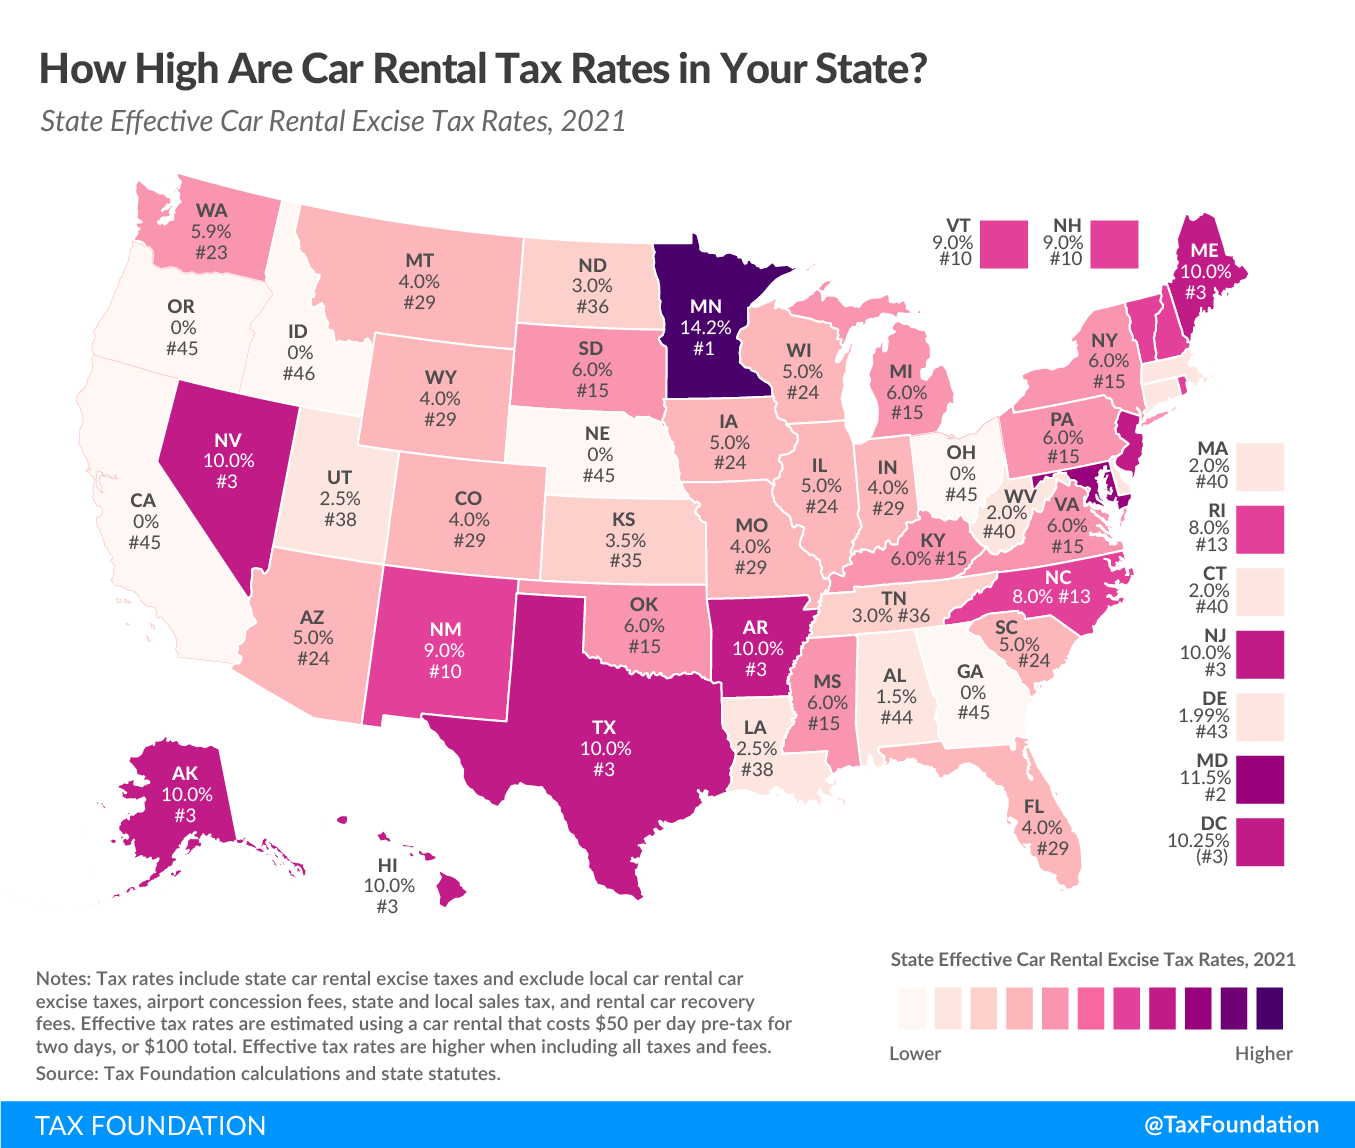 State and Local Car Rental Excise Tax Rates. Modernizing Rental Car Excise Taxes and Peer-to-Peer Car Sharing Taxes for a Post-Pandemic Future